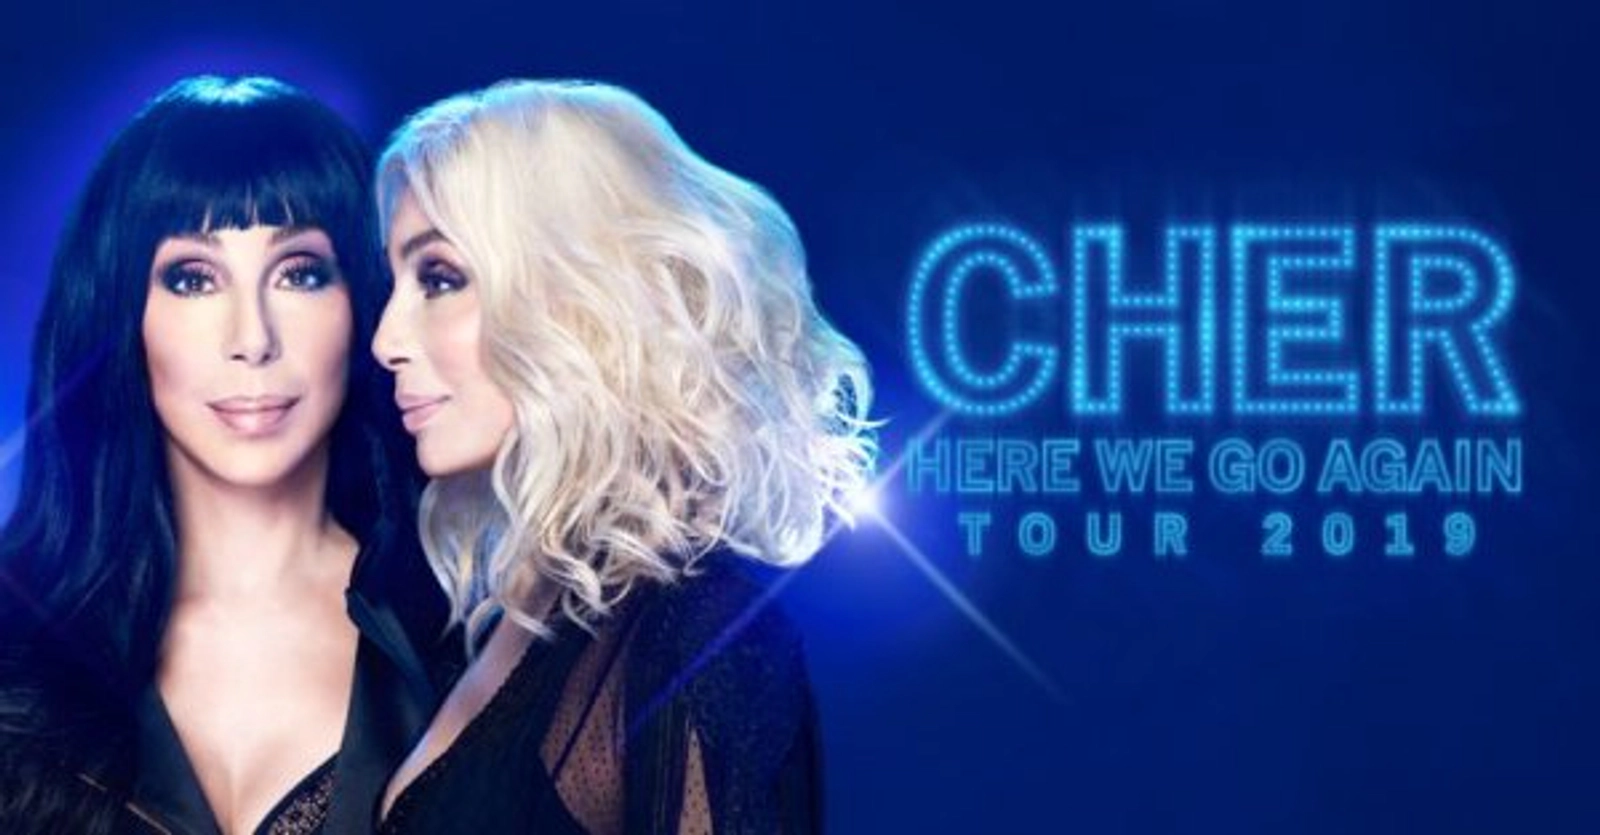       Enter to win a pair of tickets to see Cher live Nov. 27th - Thumbnail Image